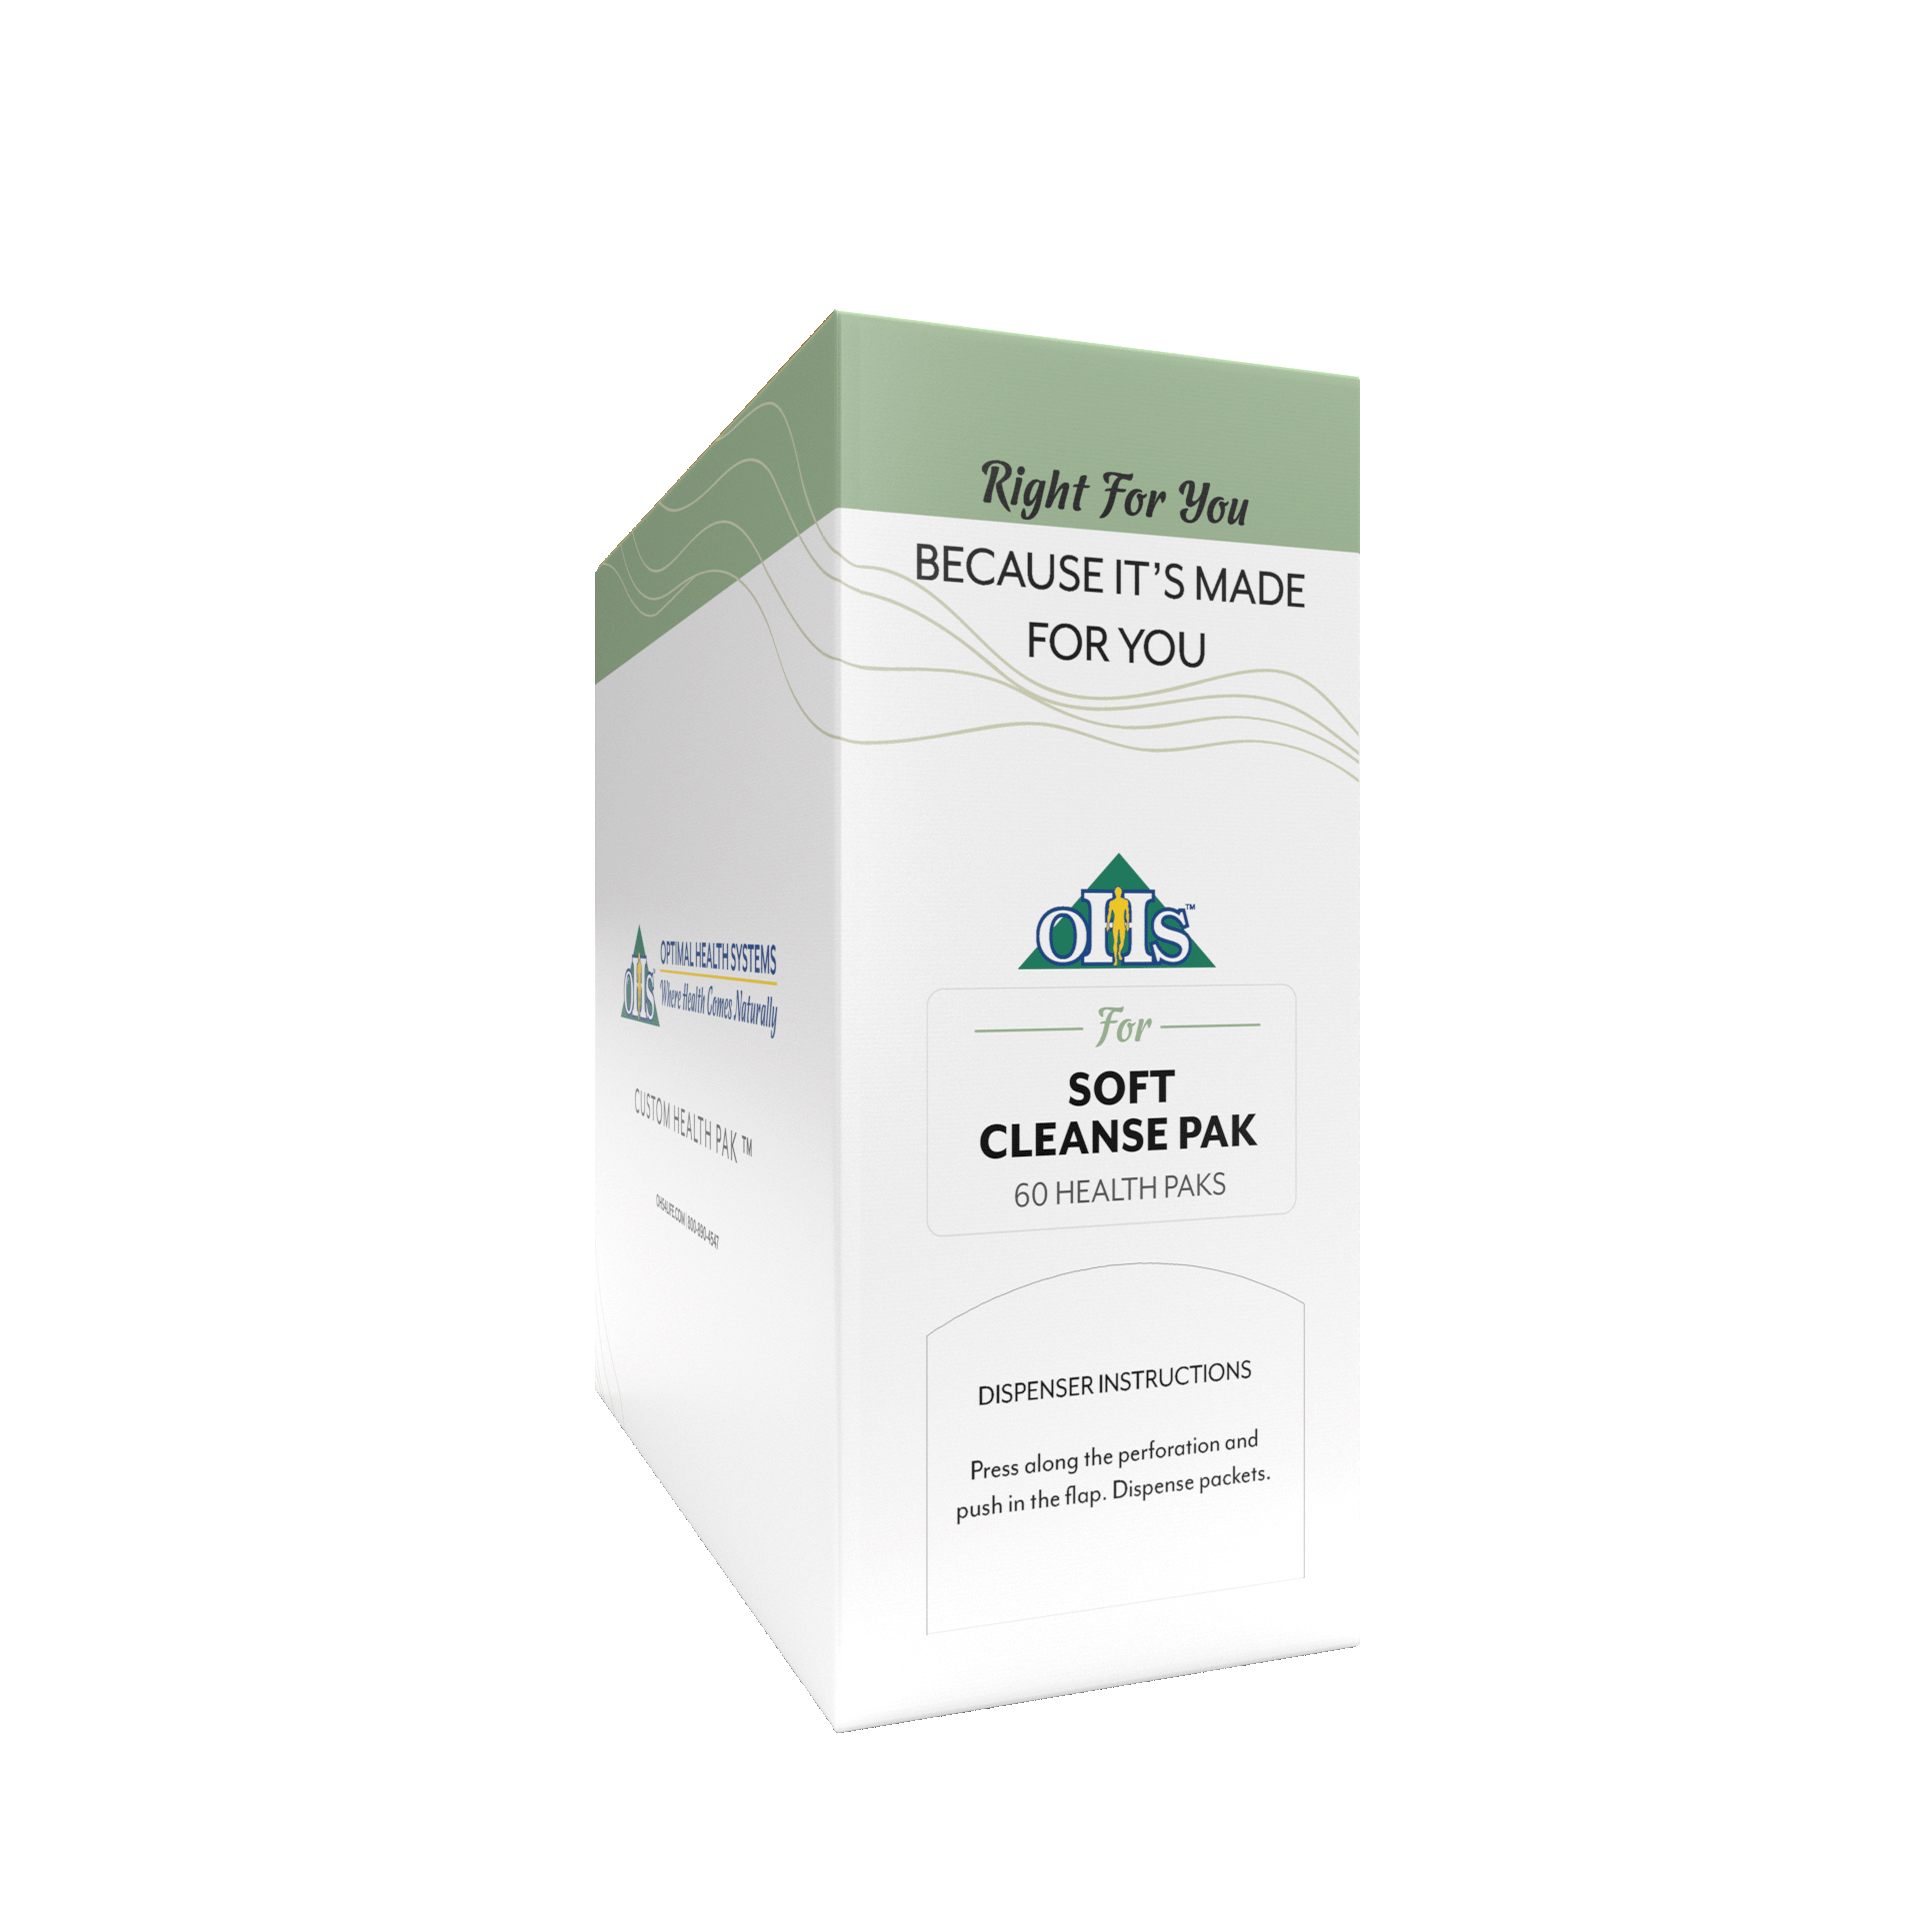 Image of an Optimal Soft Cleanse Pak.